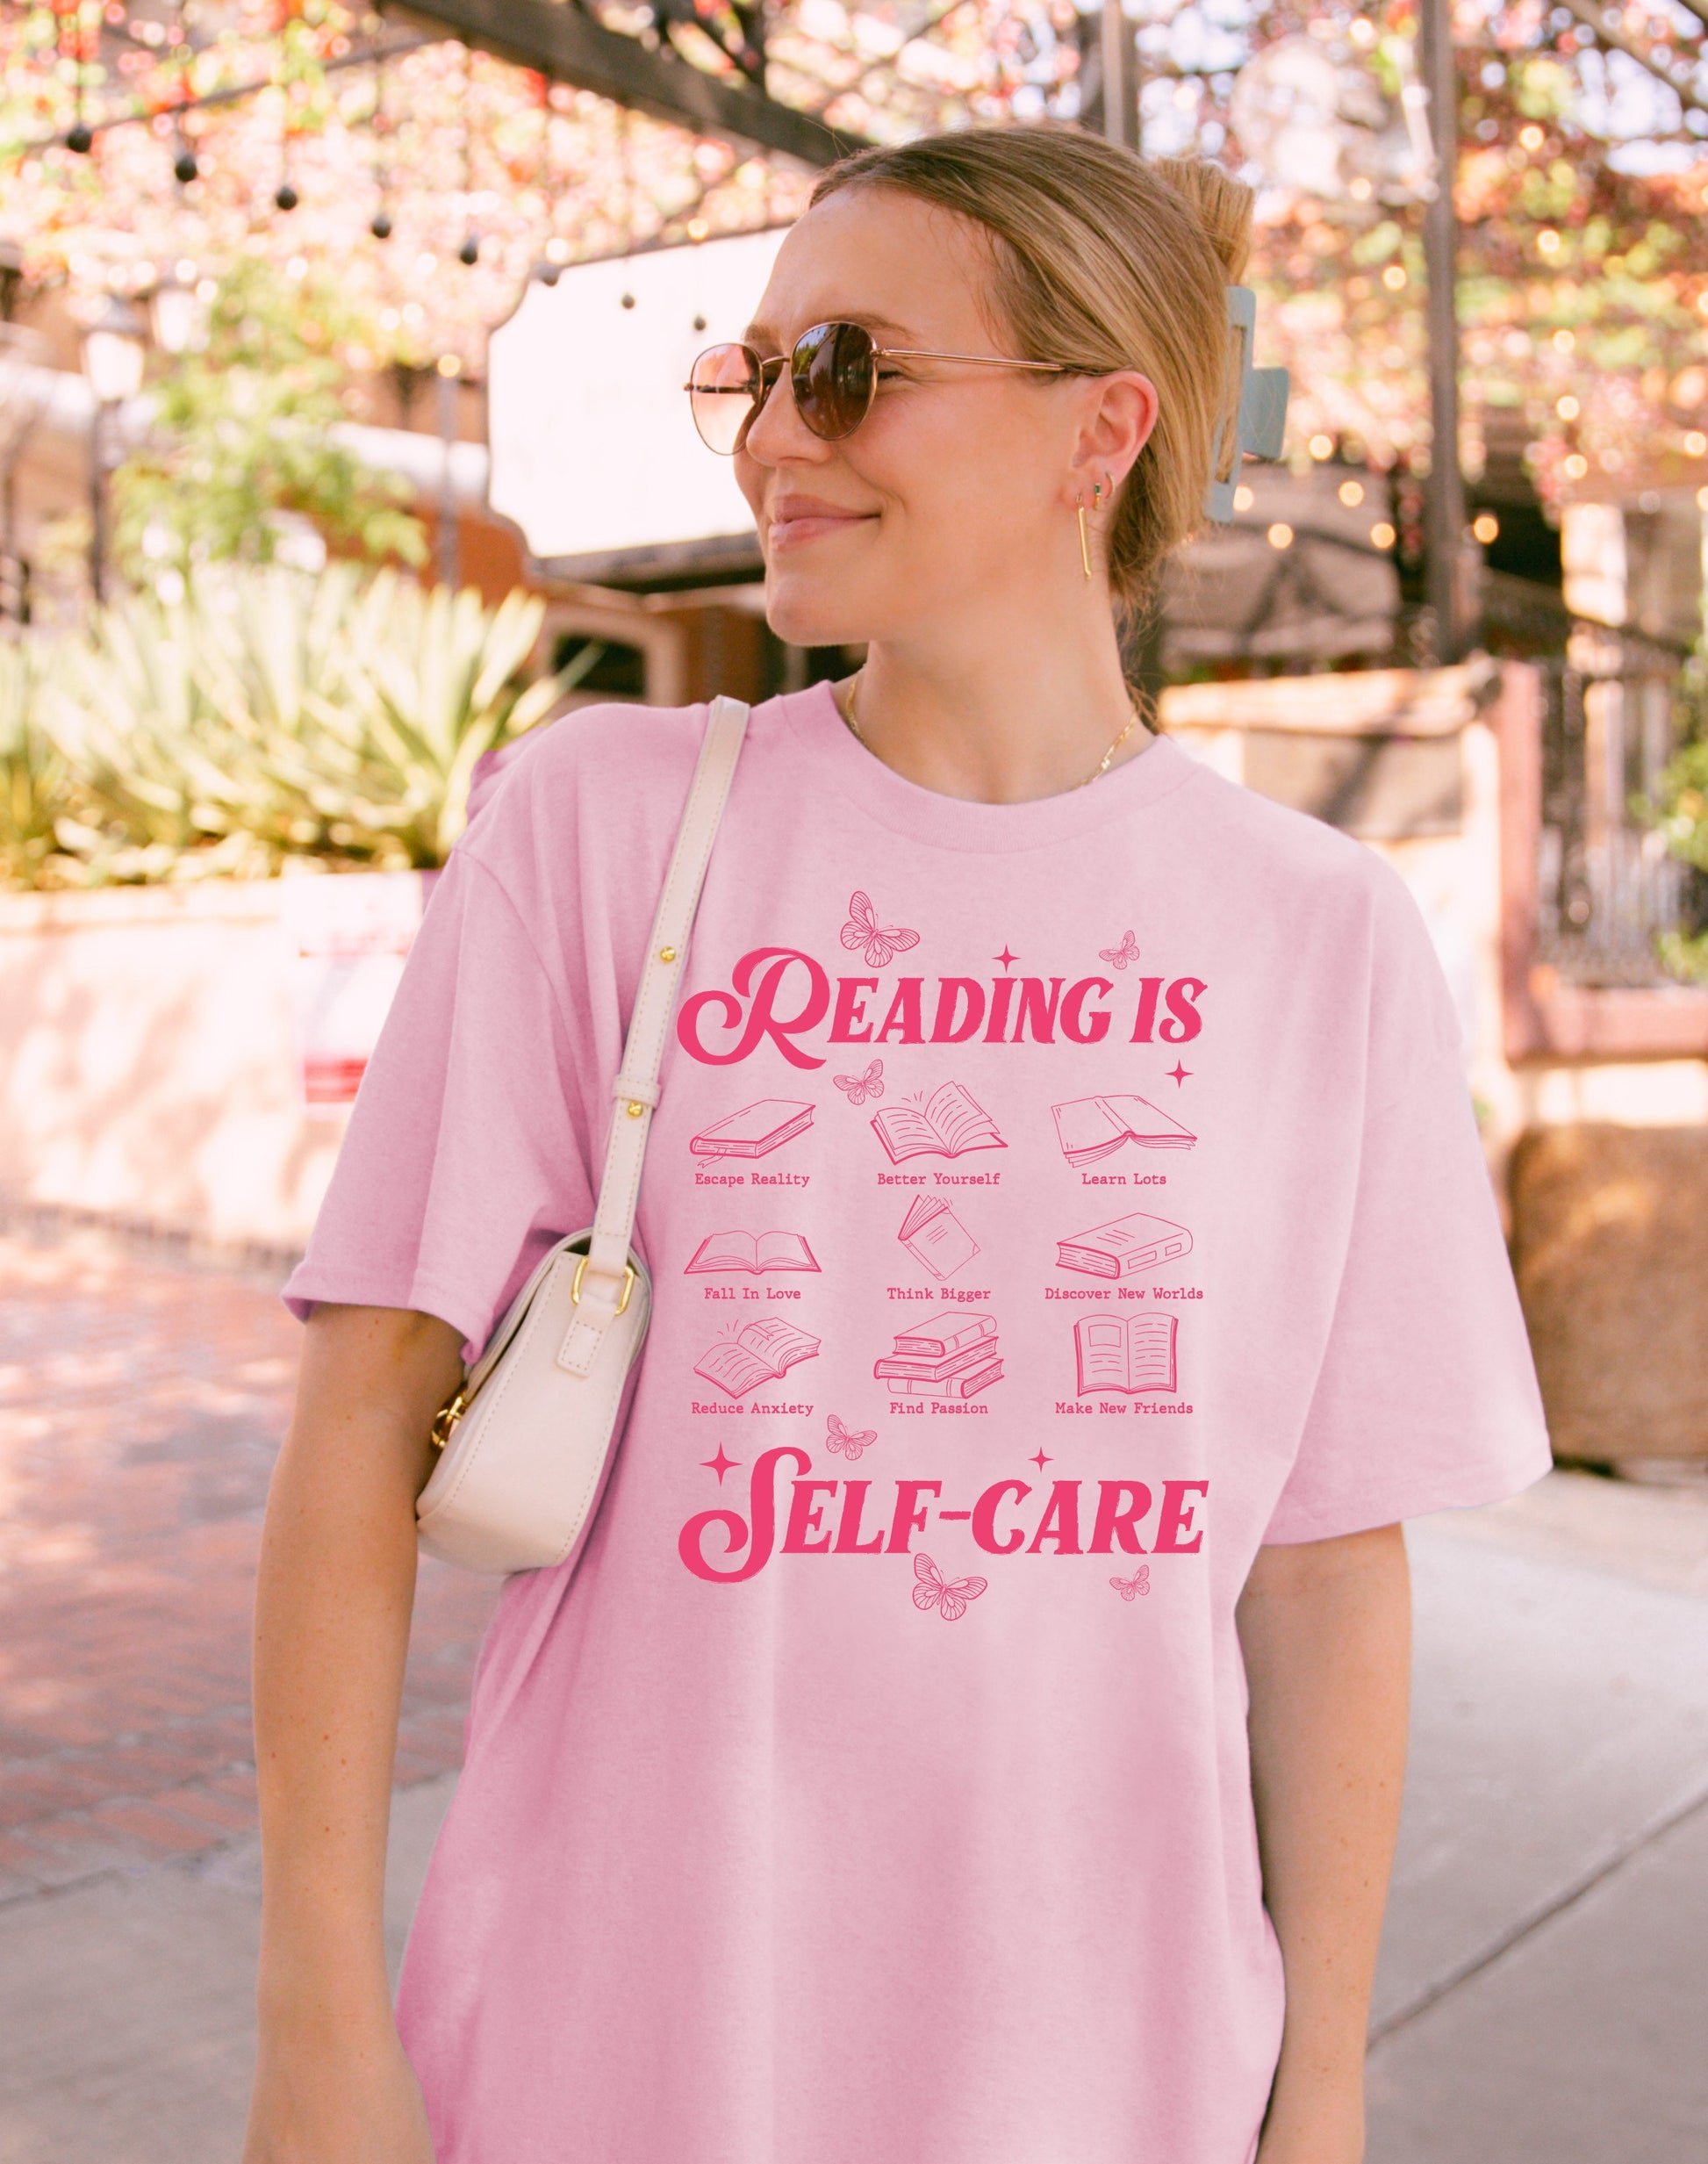 Reading is Self Care Shirt, Bookworm TShirt, Self Love Tee, Inspirational Gift, Book Lovers Gift, Mindfulness Tee